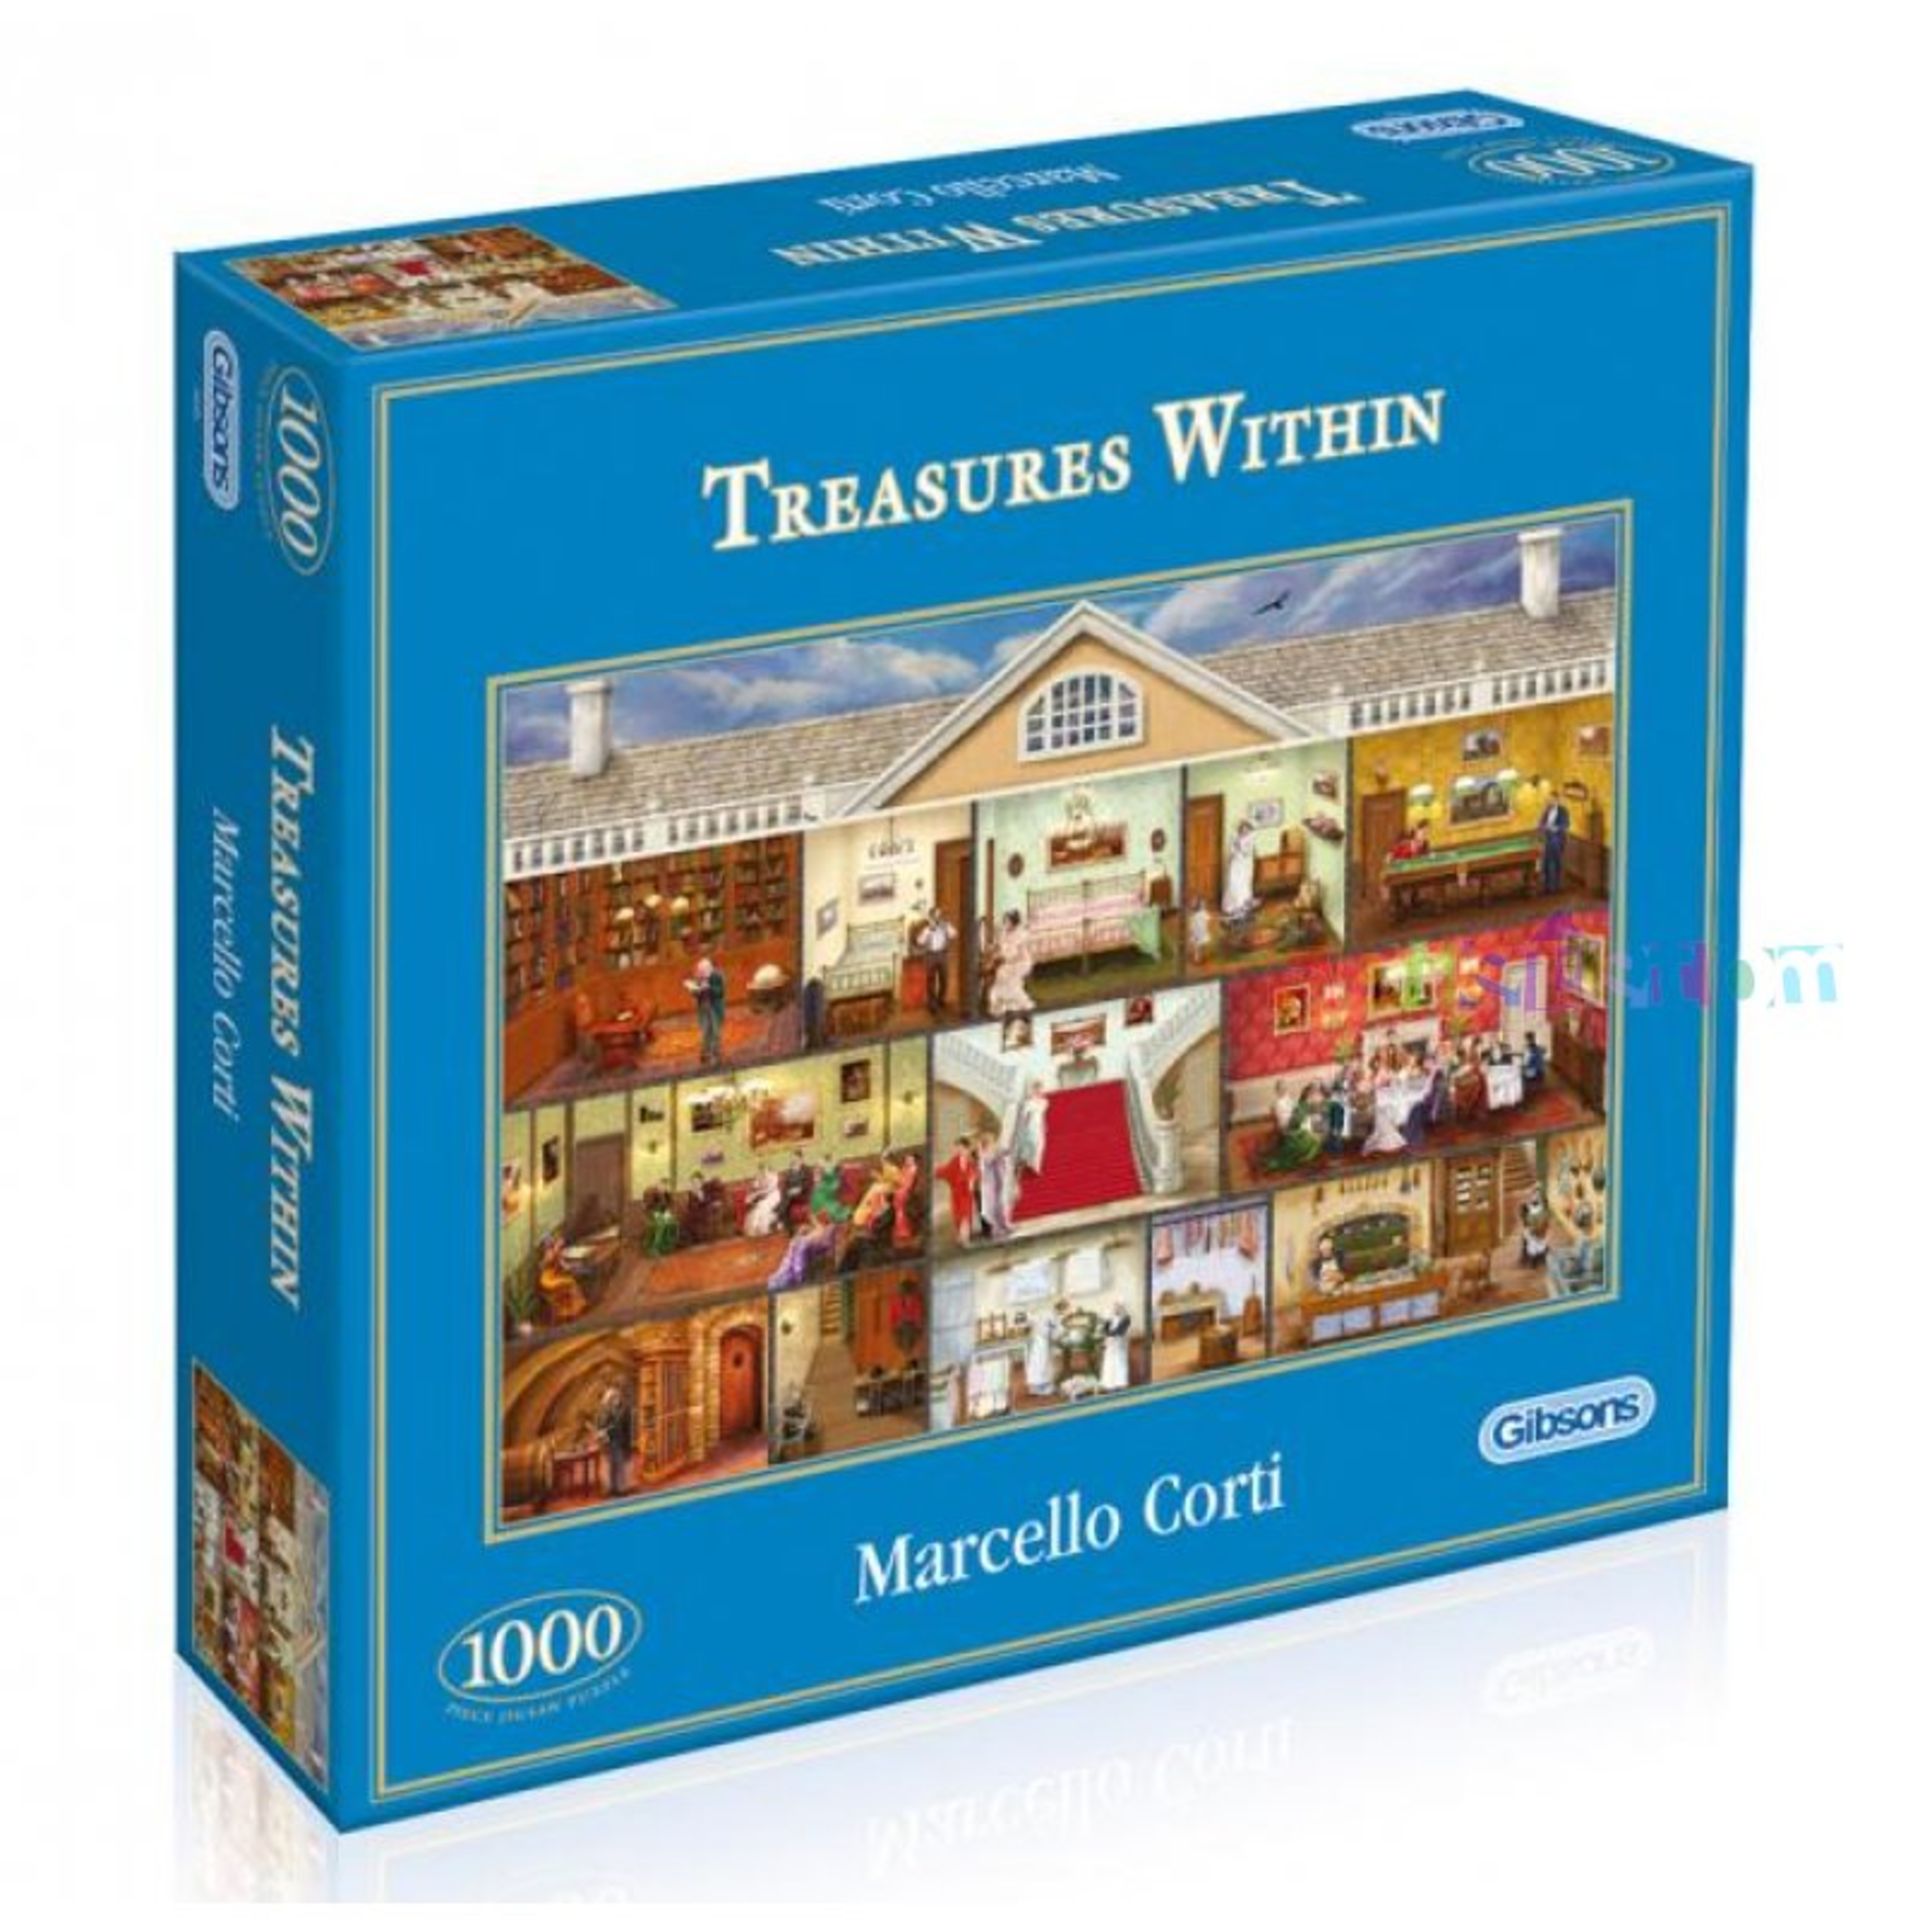 V Gibsons Marcello Corti " Treasures Within" 1000pc puzzle X  3  Bid price to be multiplied by